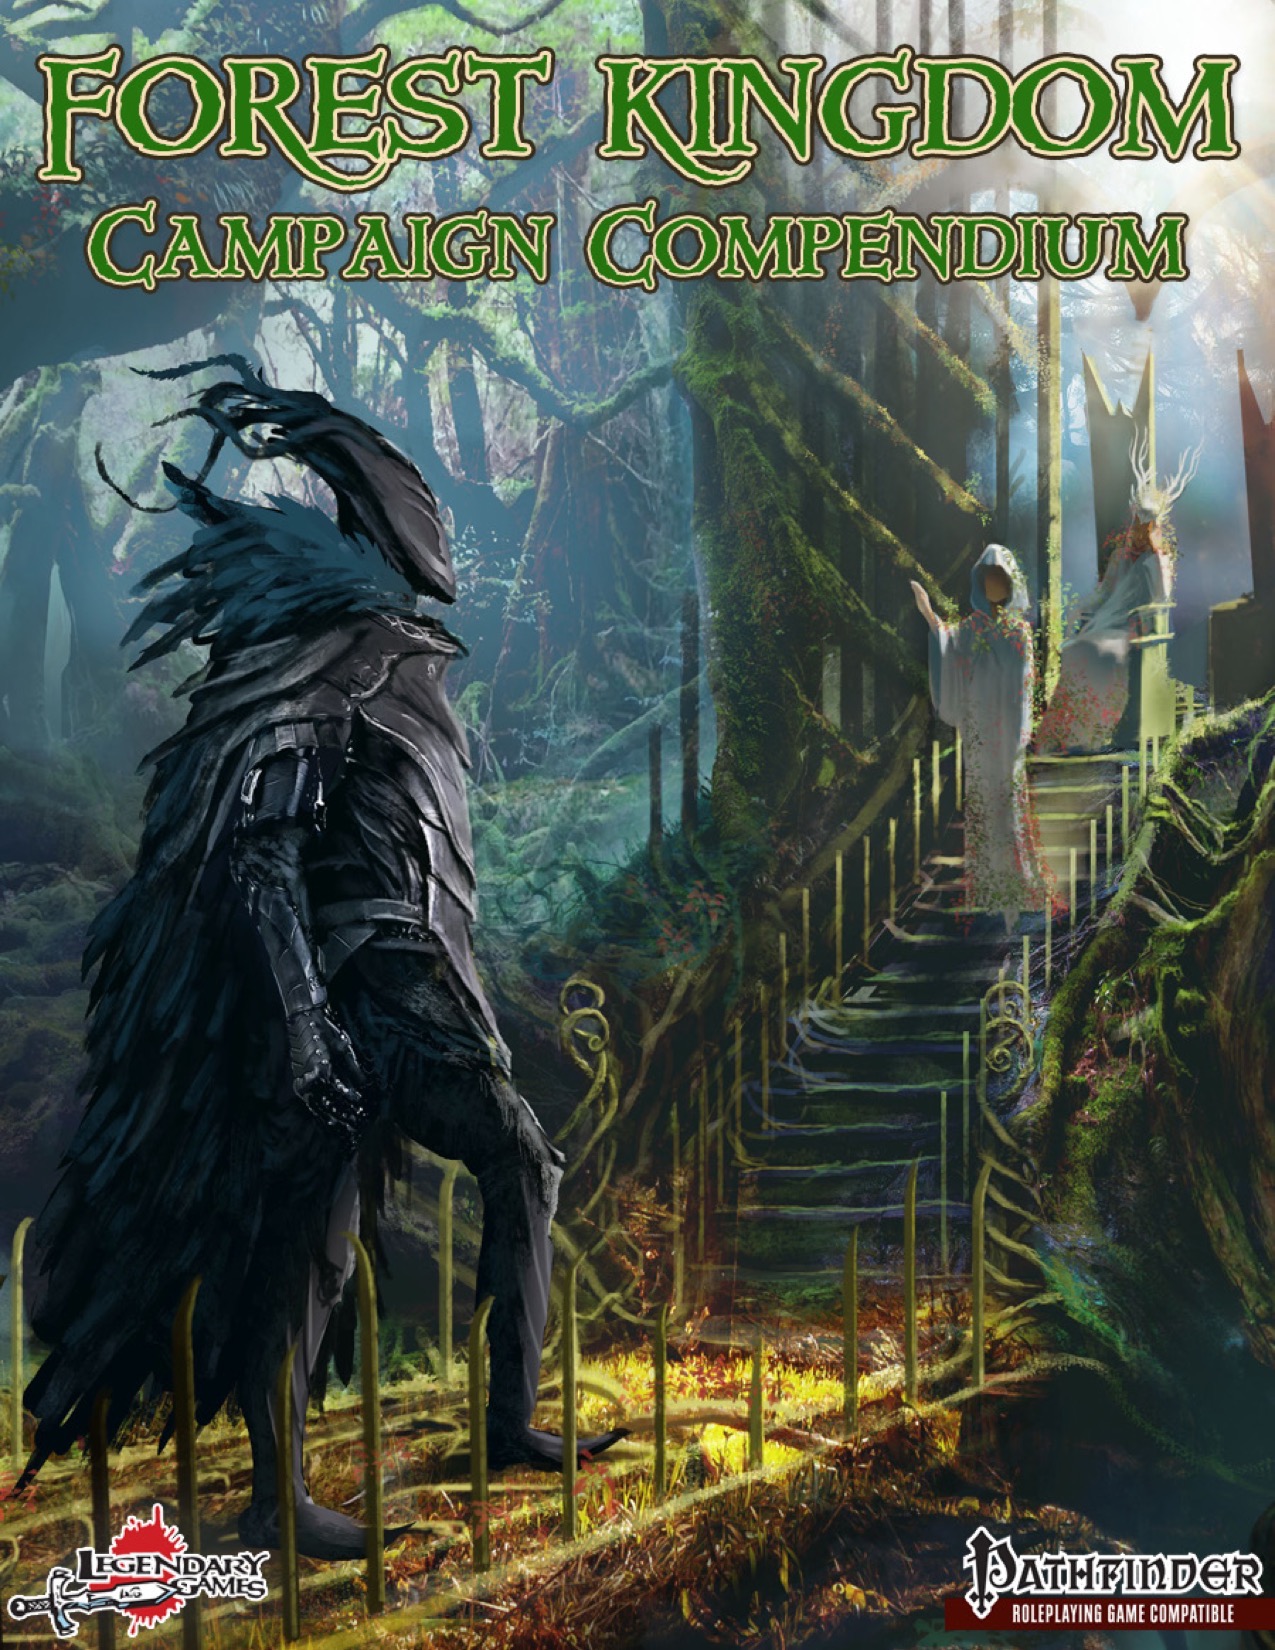 Pathfinder 2nd Edition House Rules Compendium